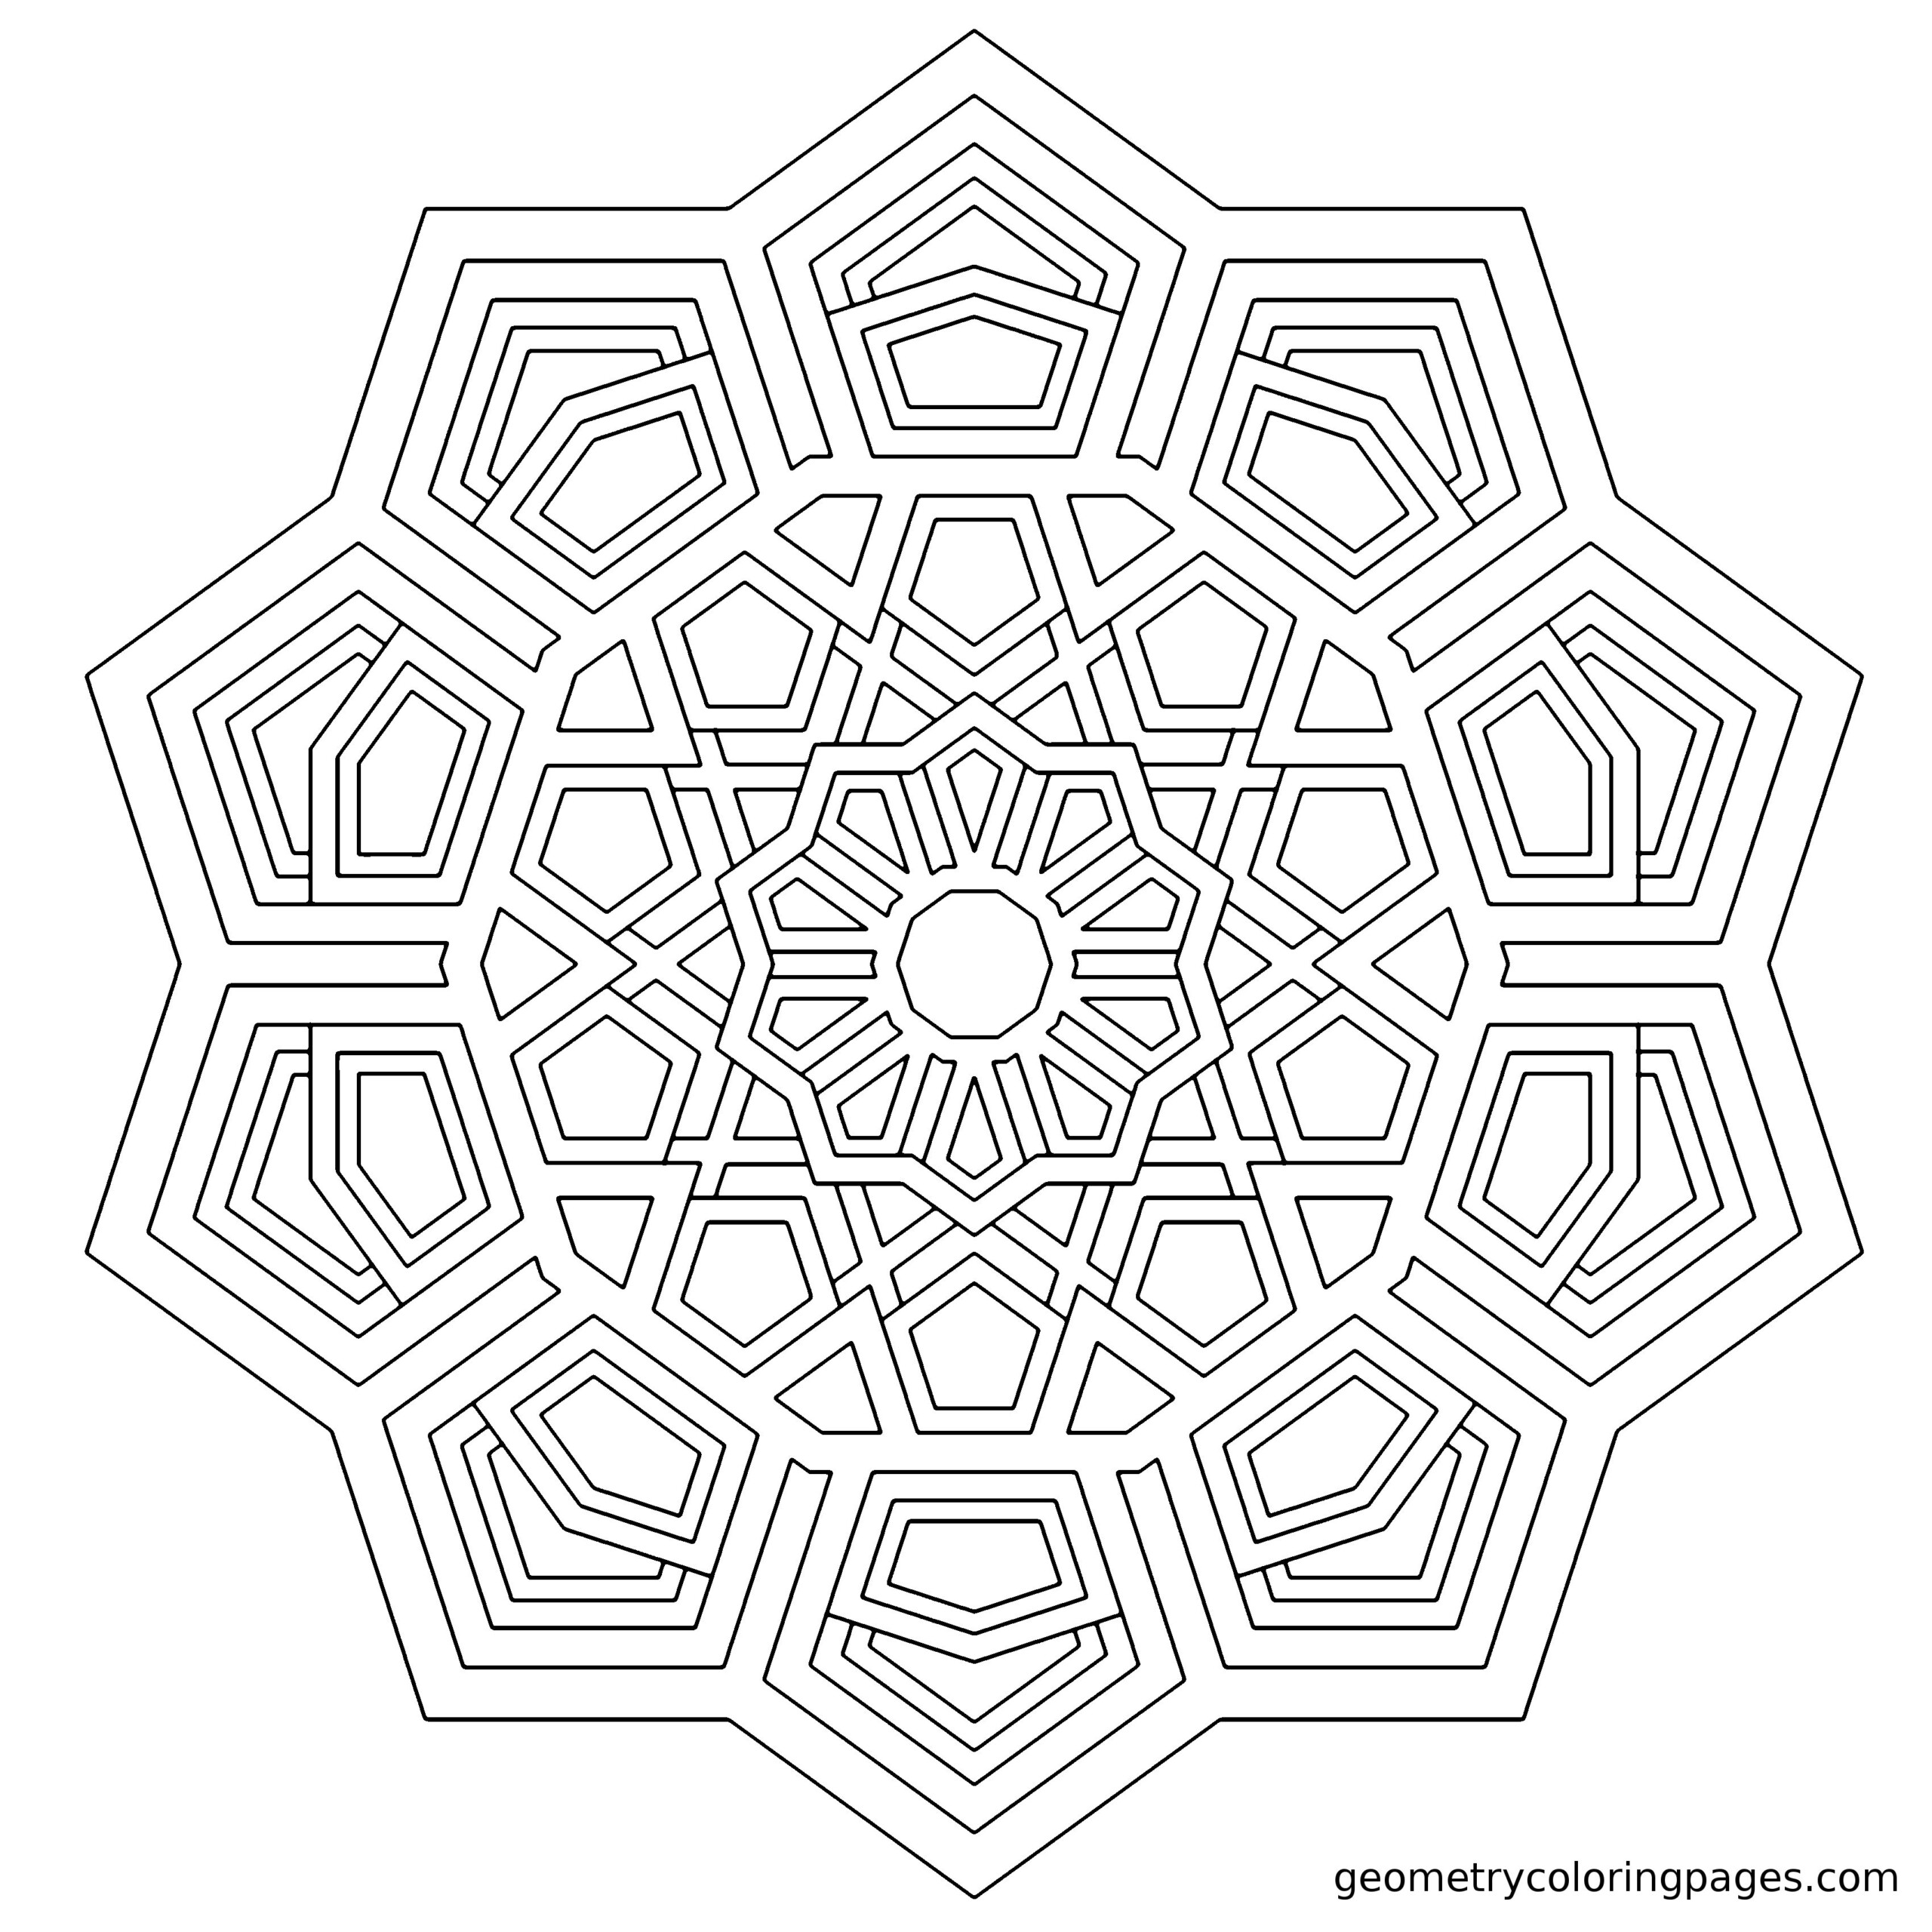 Tesseract Geometrycoloringpages Geometric Coloring Pages